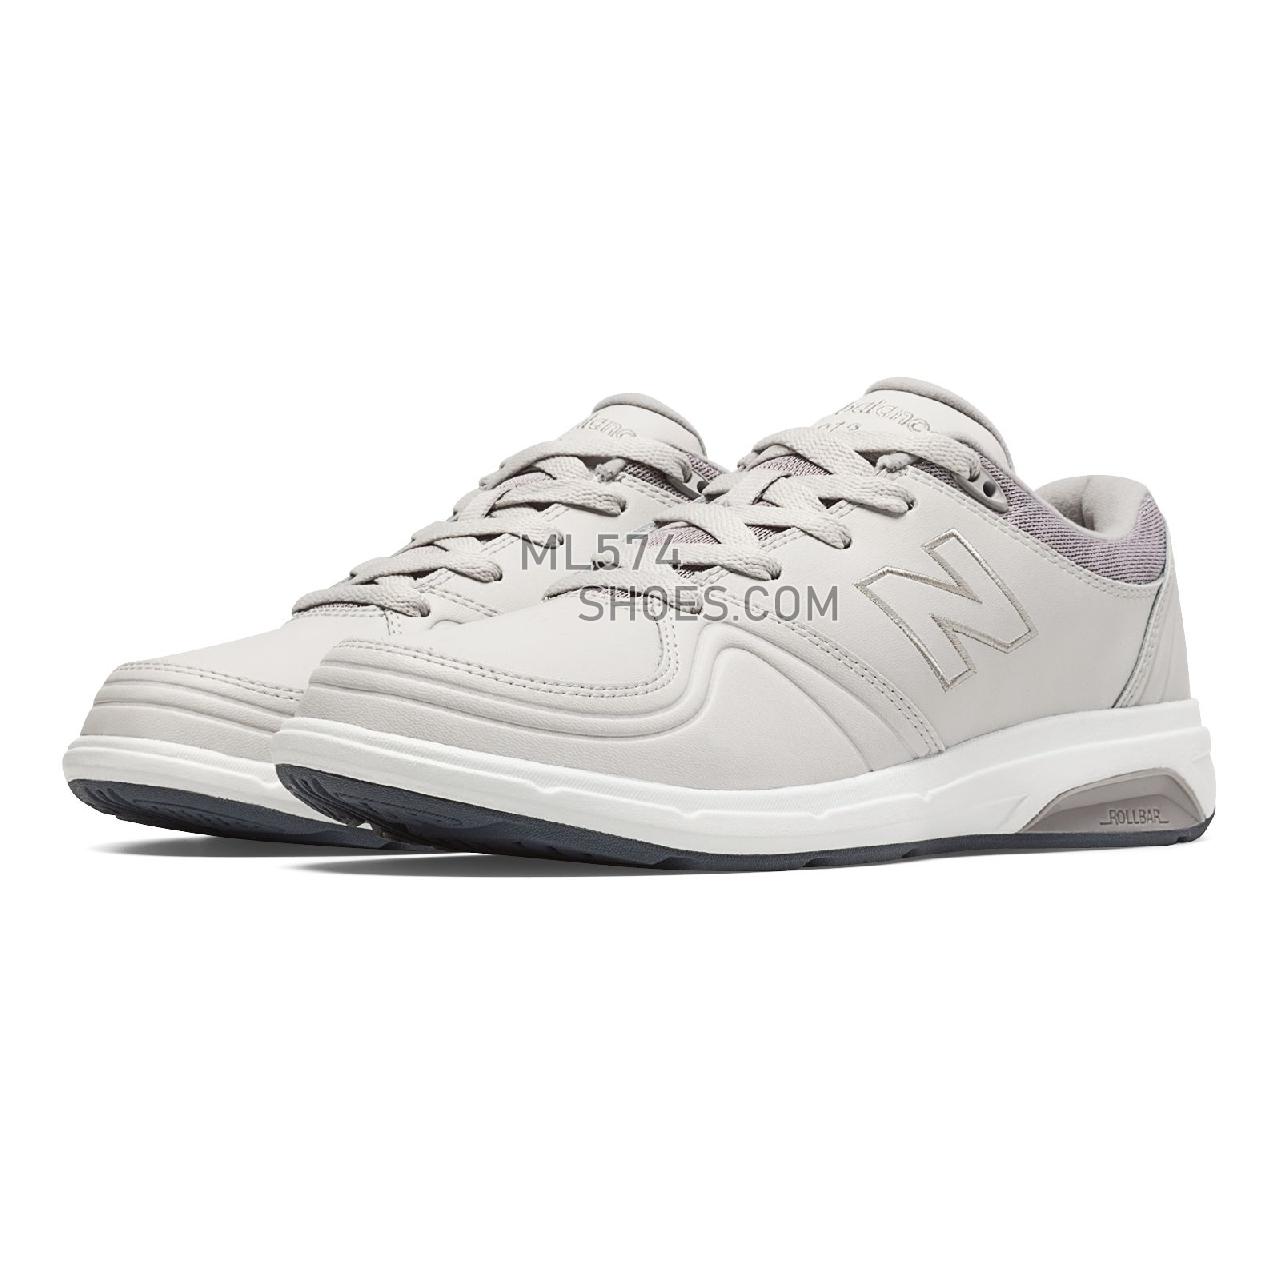 New Balance Women's 813 - Women's 813 - Walking Off White with Light Grey and Lead - WW813GY1